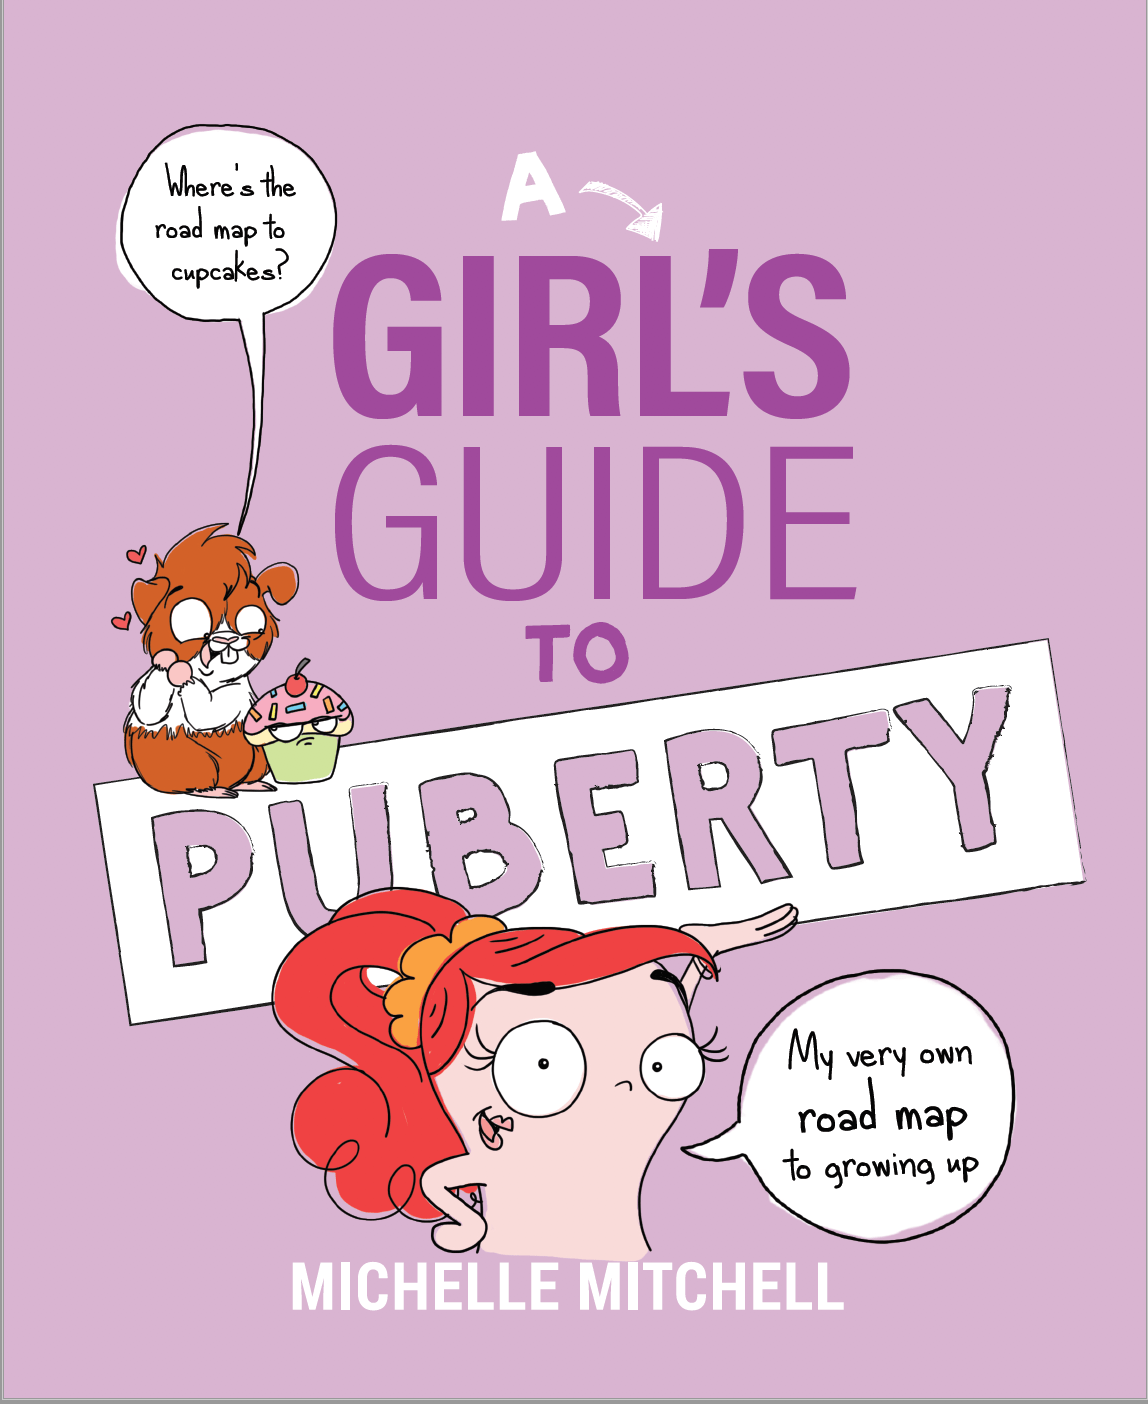 Sex, Puberty, and All That Stuff: A Guide to Growing Up